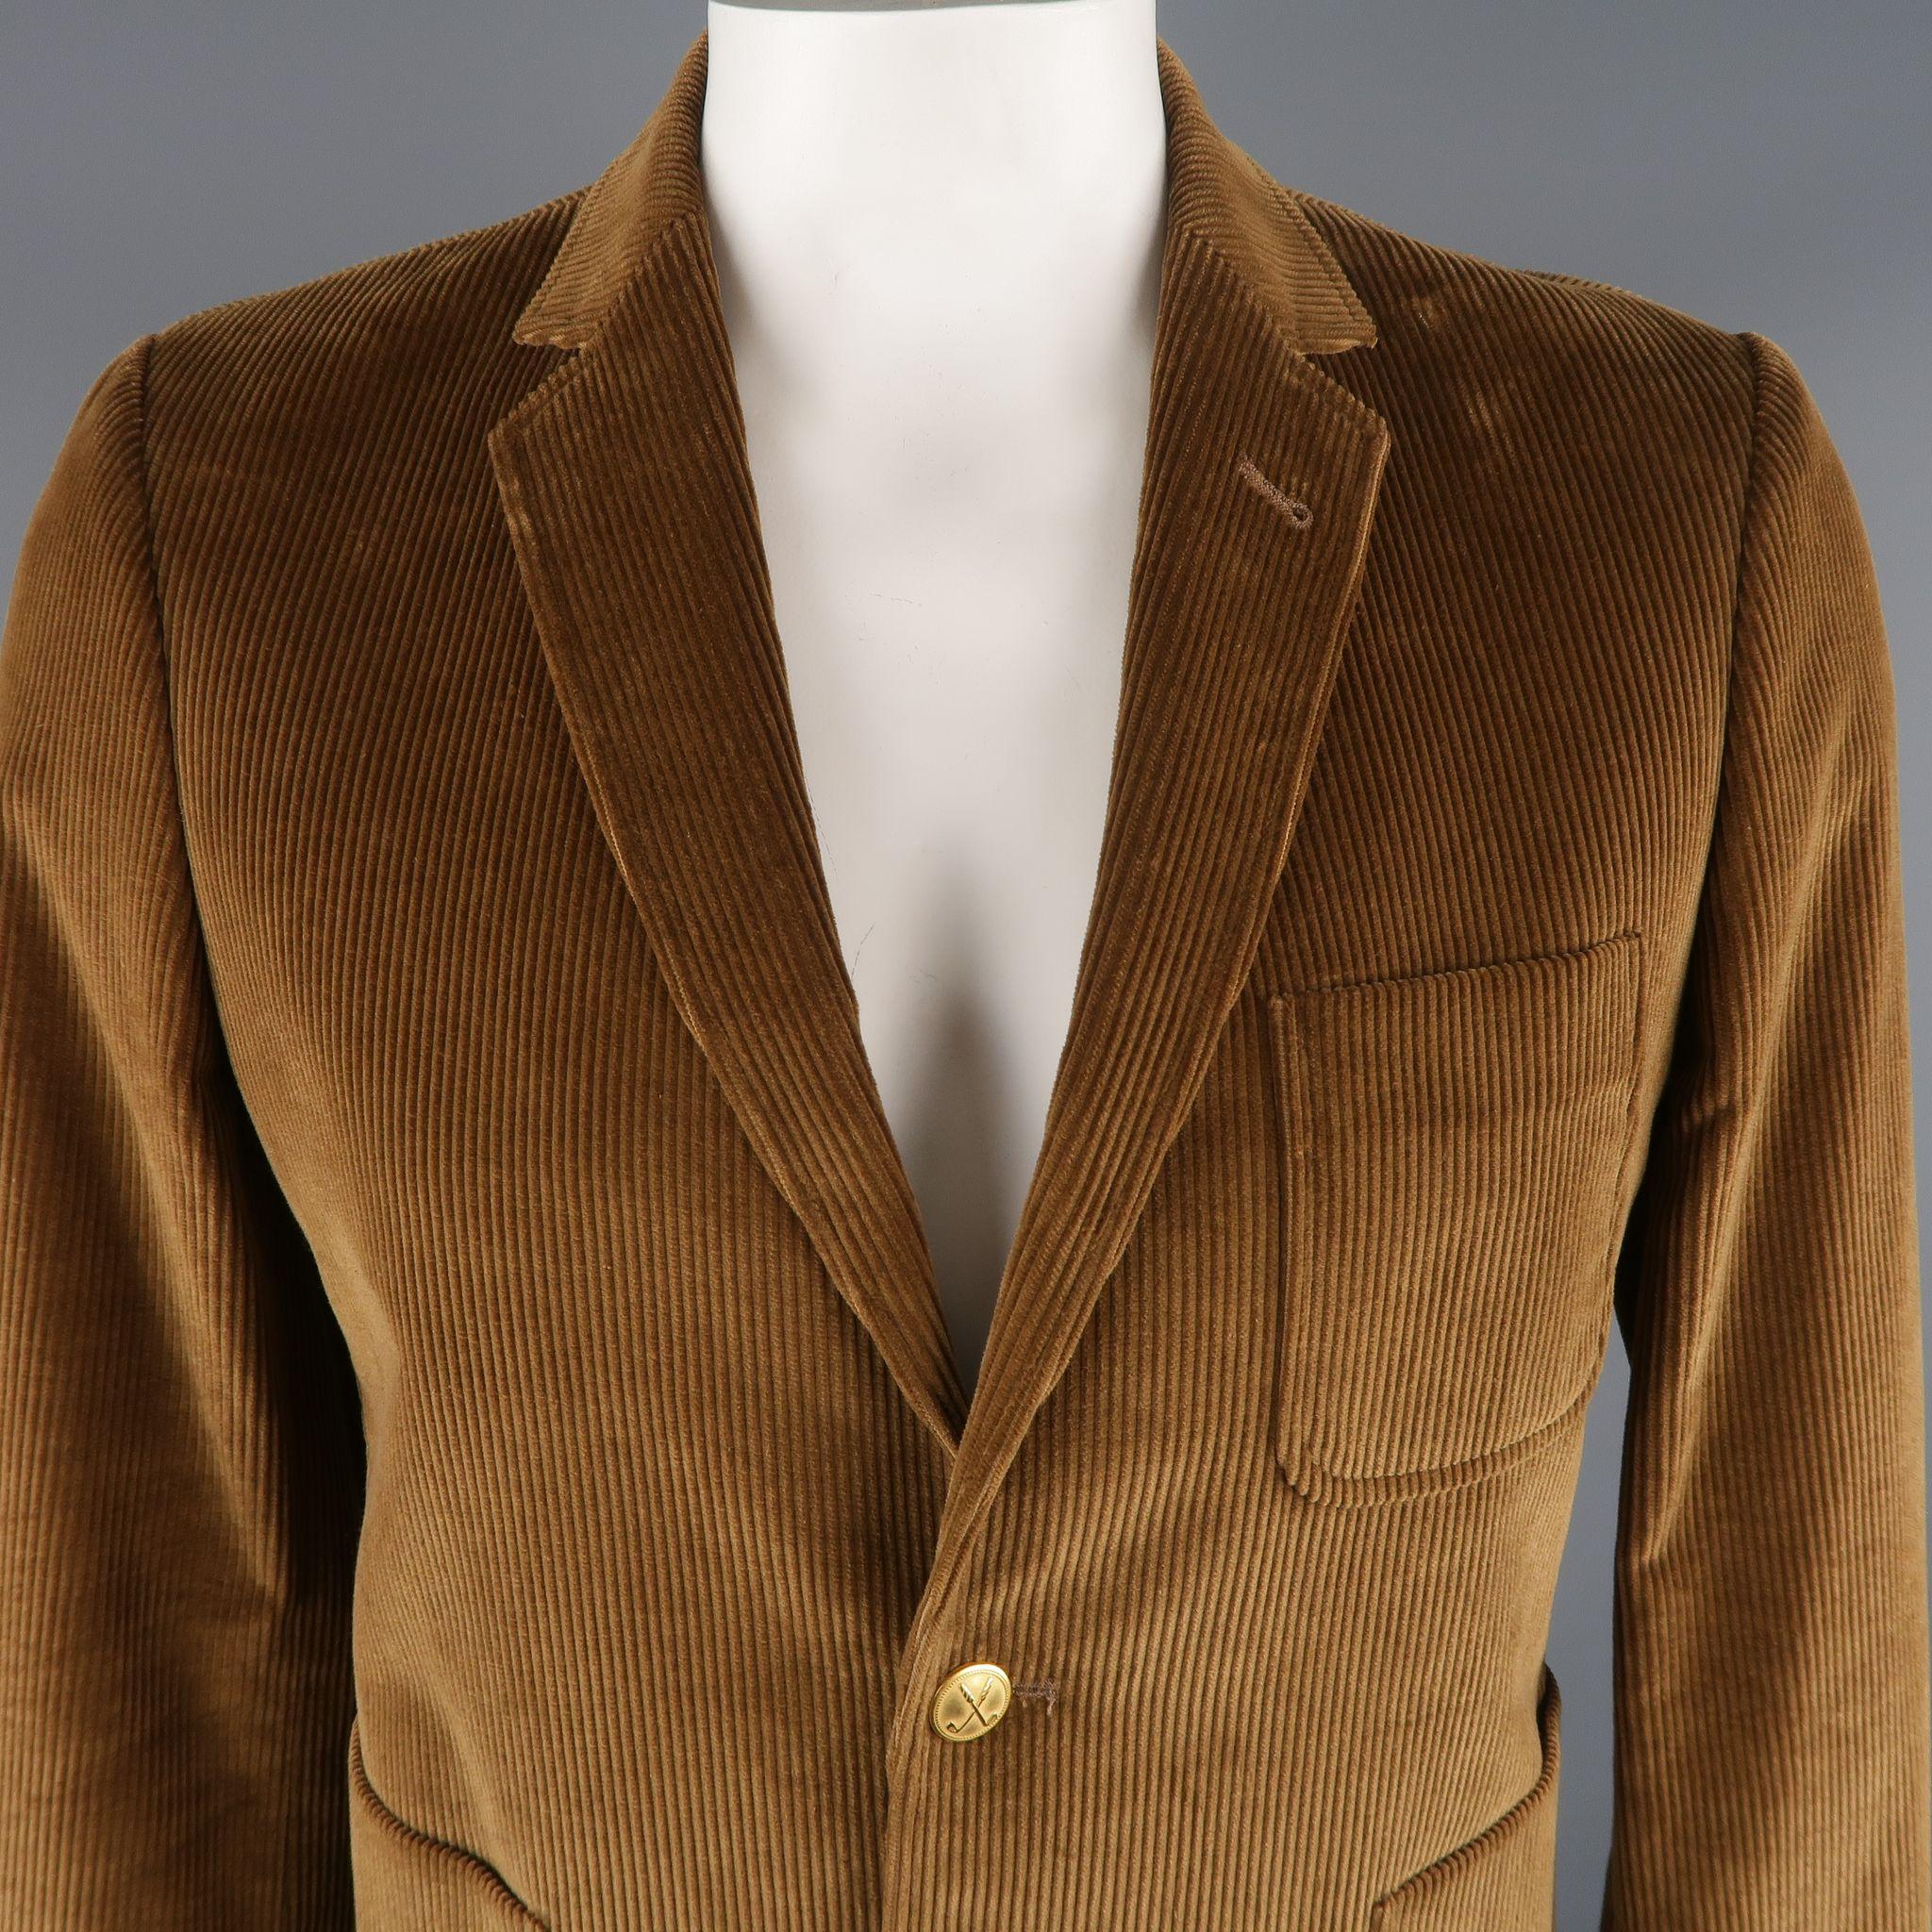 MAISON KITSUNE Sport Coat comes in a light brown tone in a solid corduroy cotton material, with a notch lapel, patch pockets, embossed gold tones metal buttons, 2 button closure and single breasted. Minor wear at one of the closure buttons. With 2